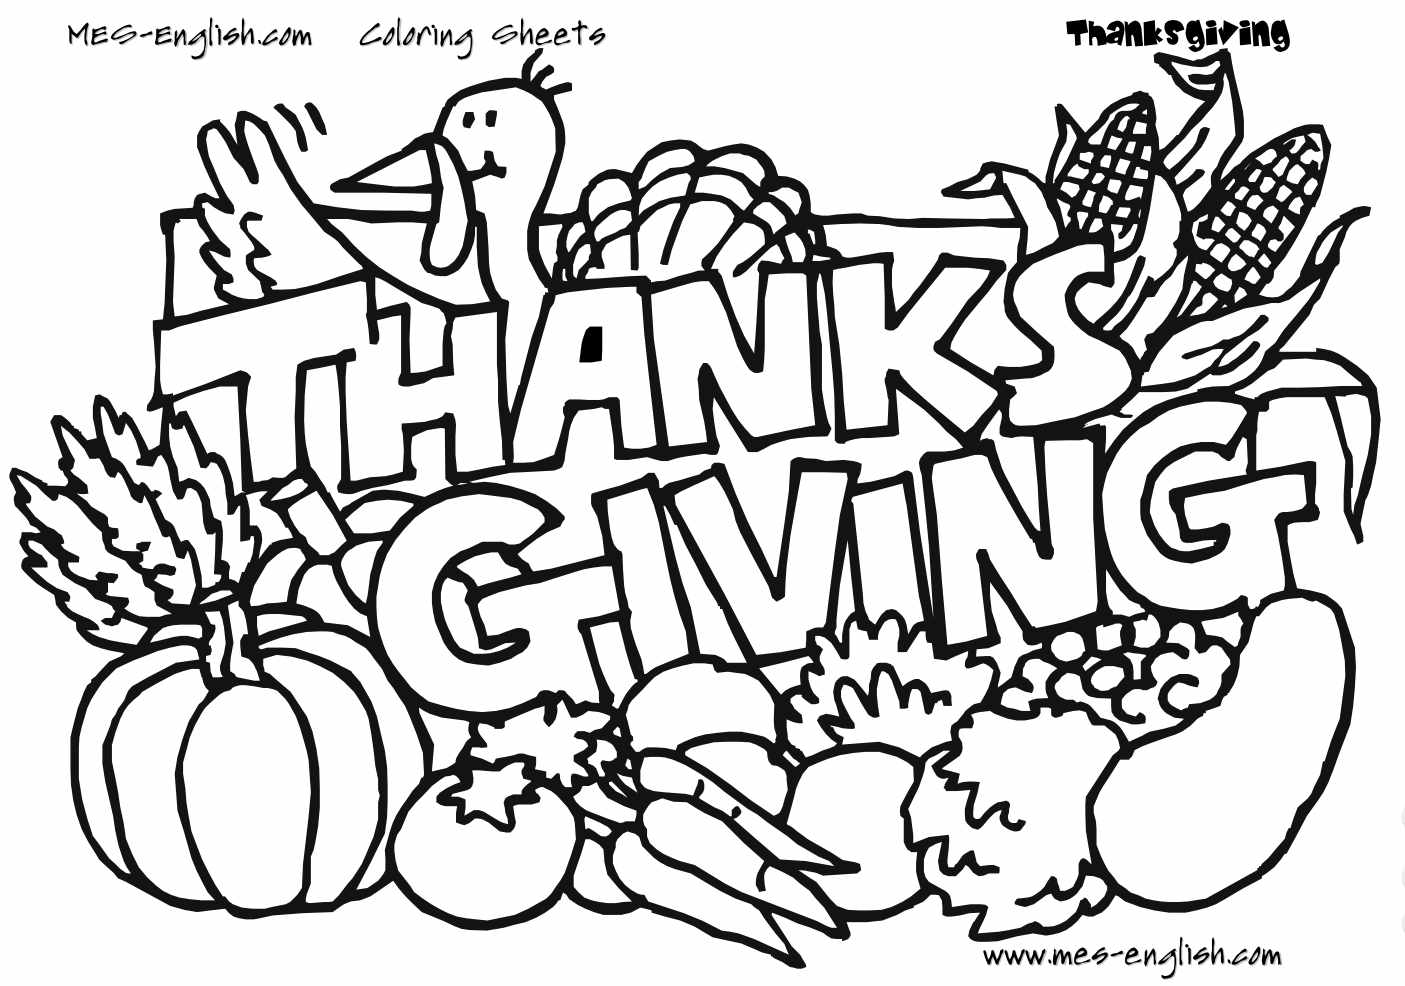 Free thanksgiving printables for your home and family